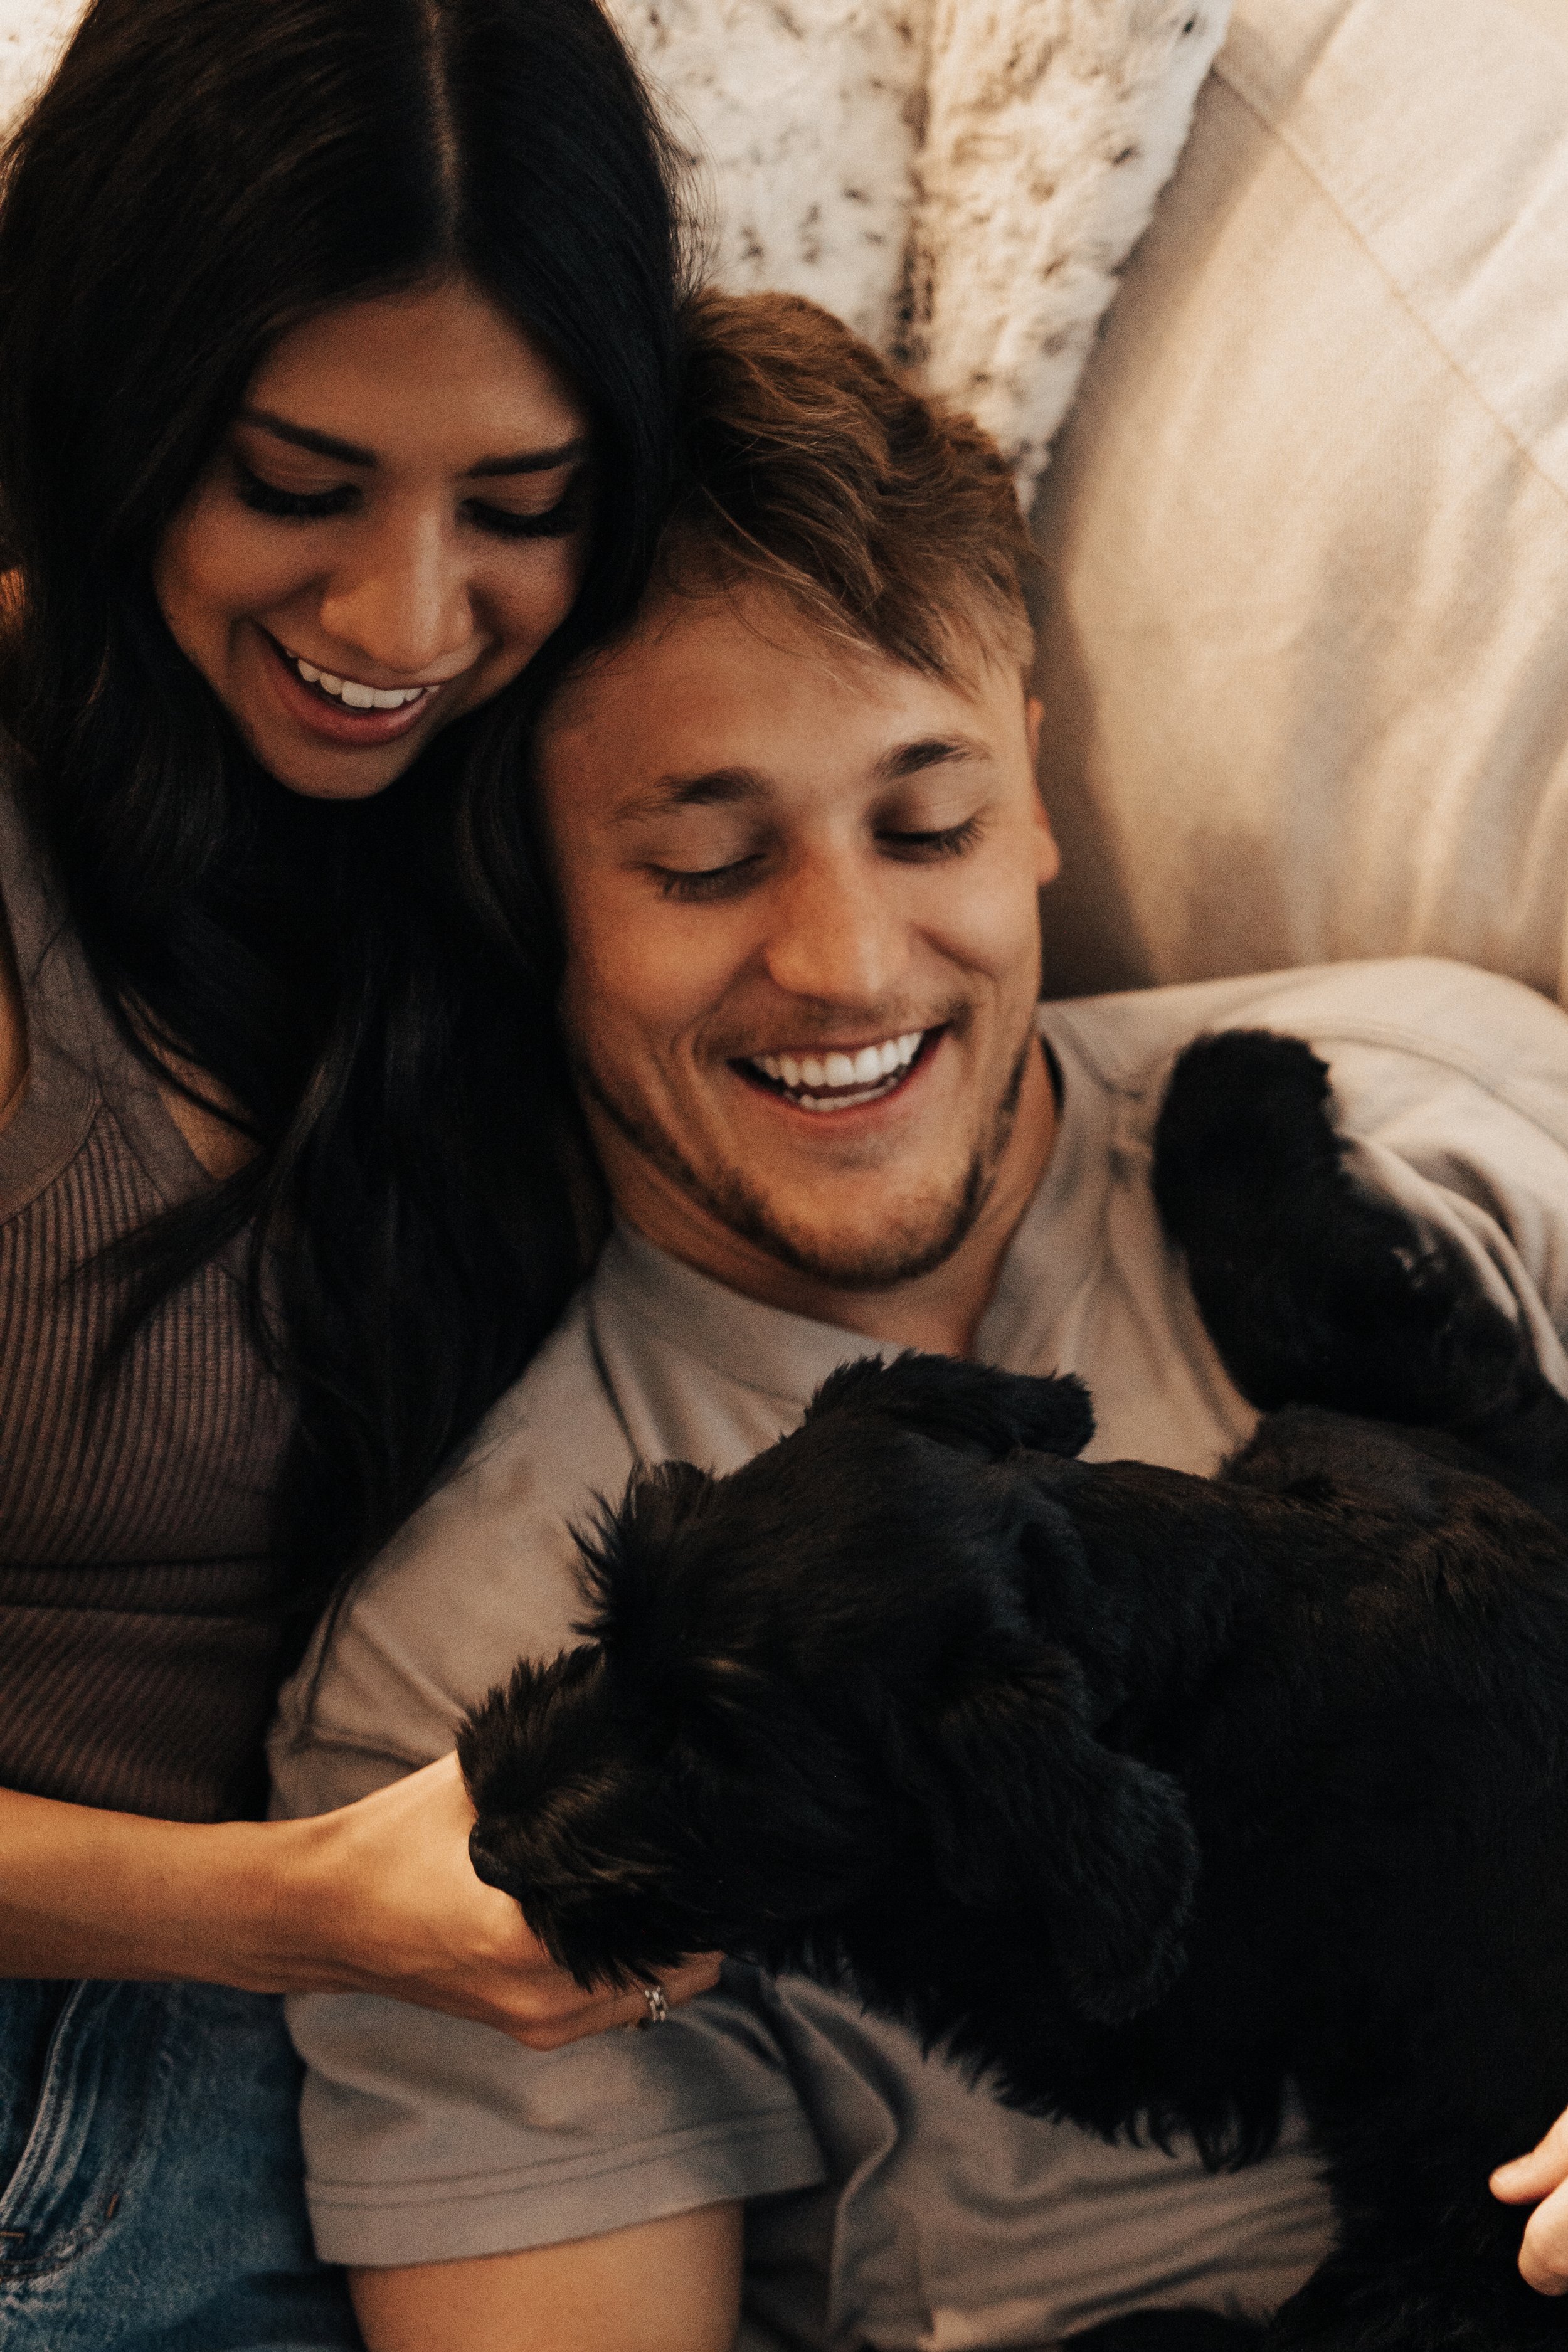 in-home-couples-shoot-with-dog-11.jpg